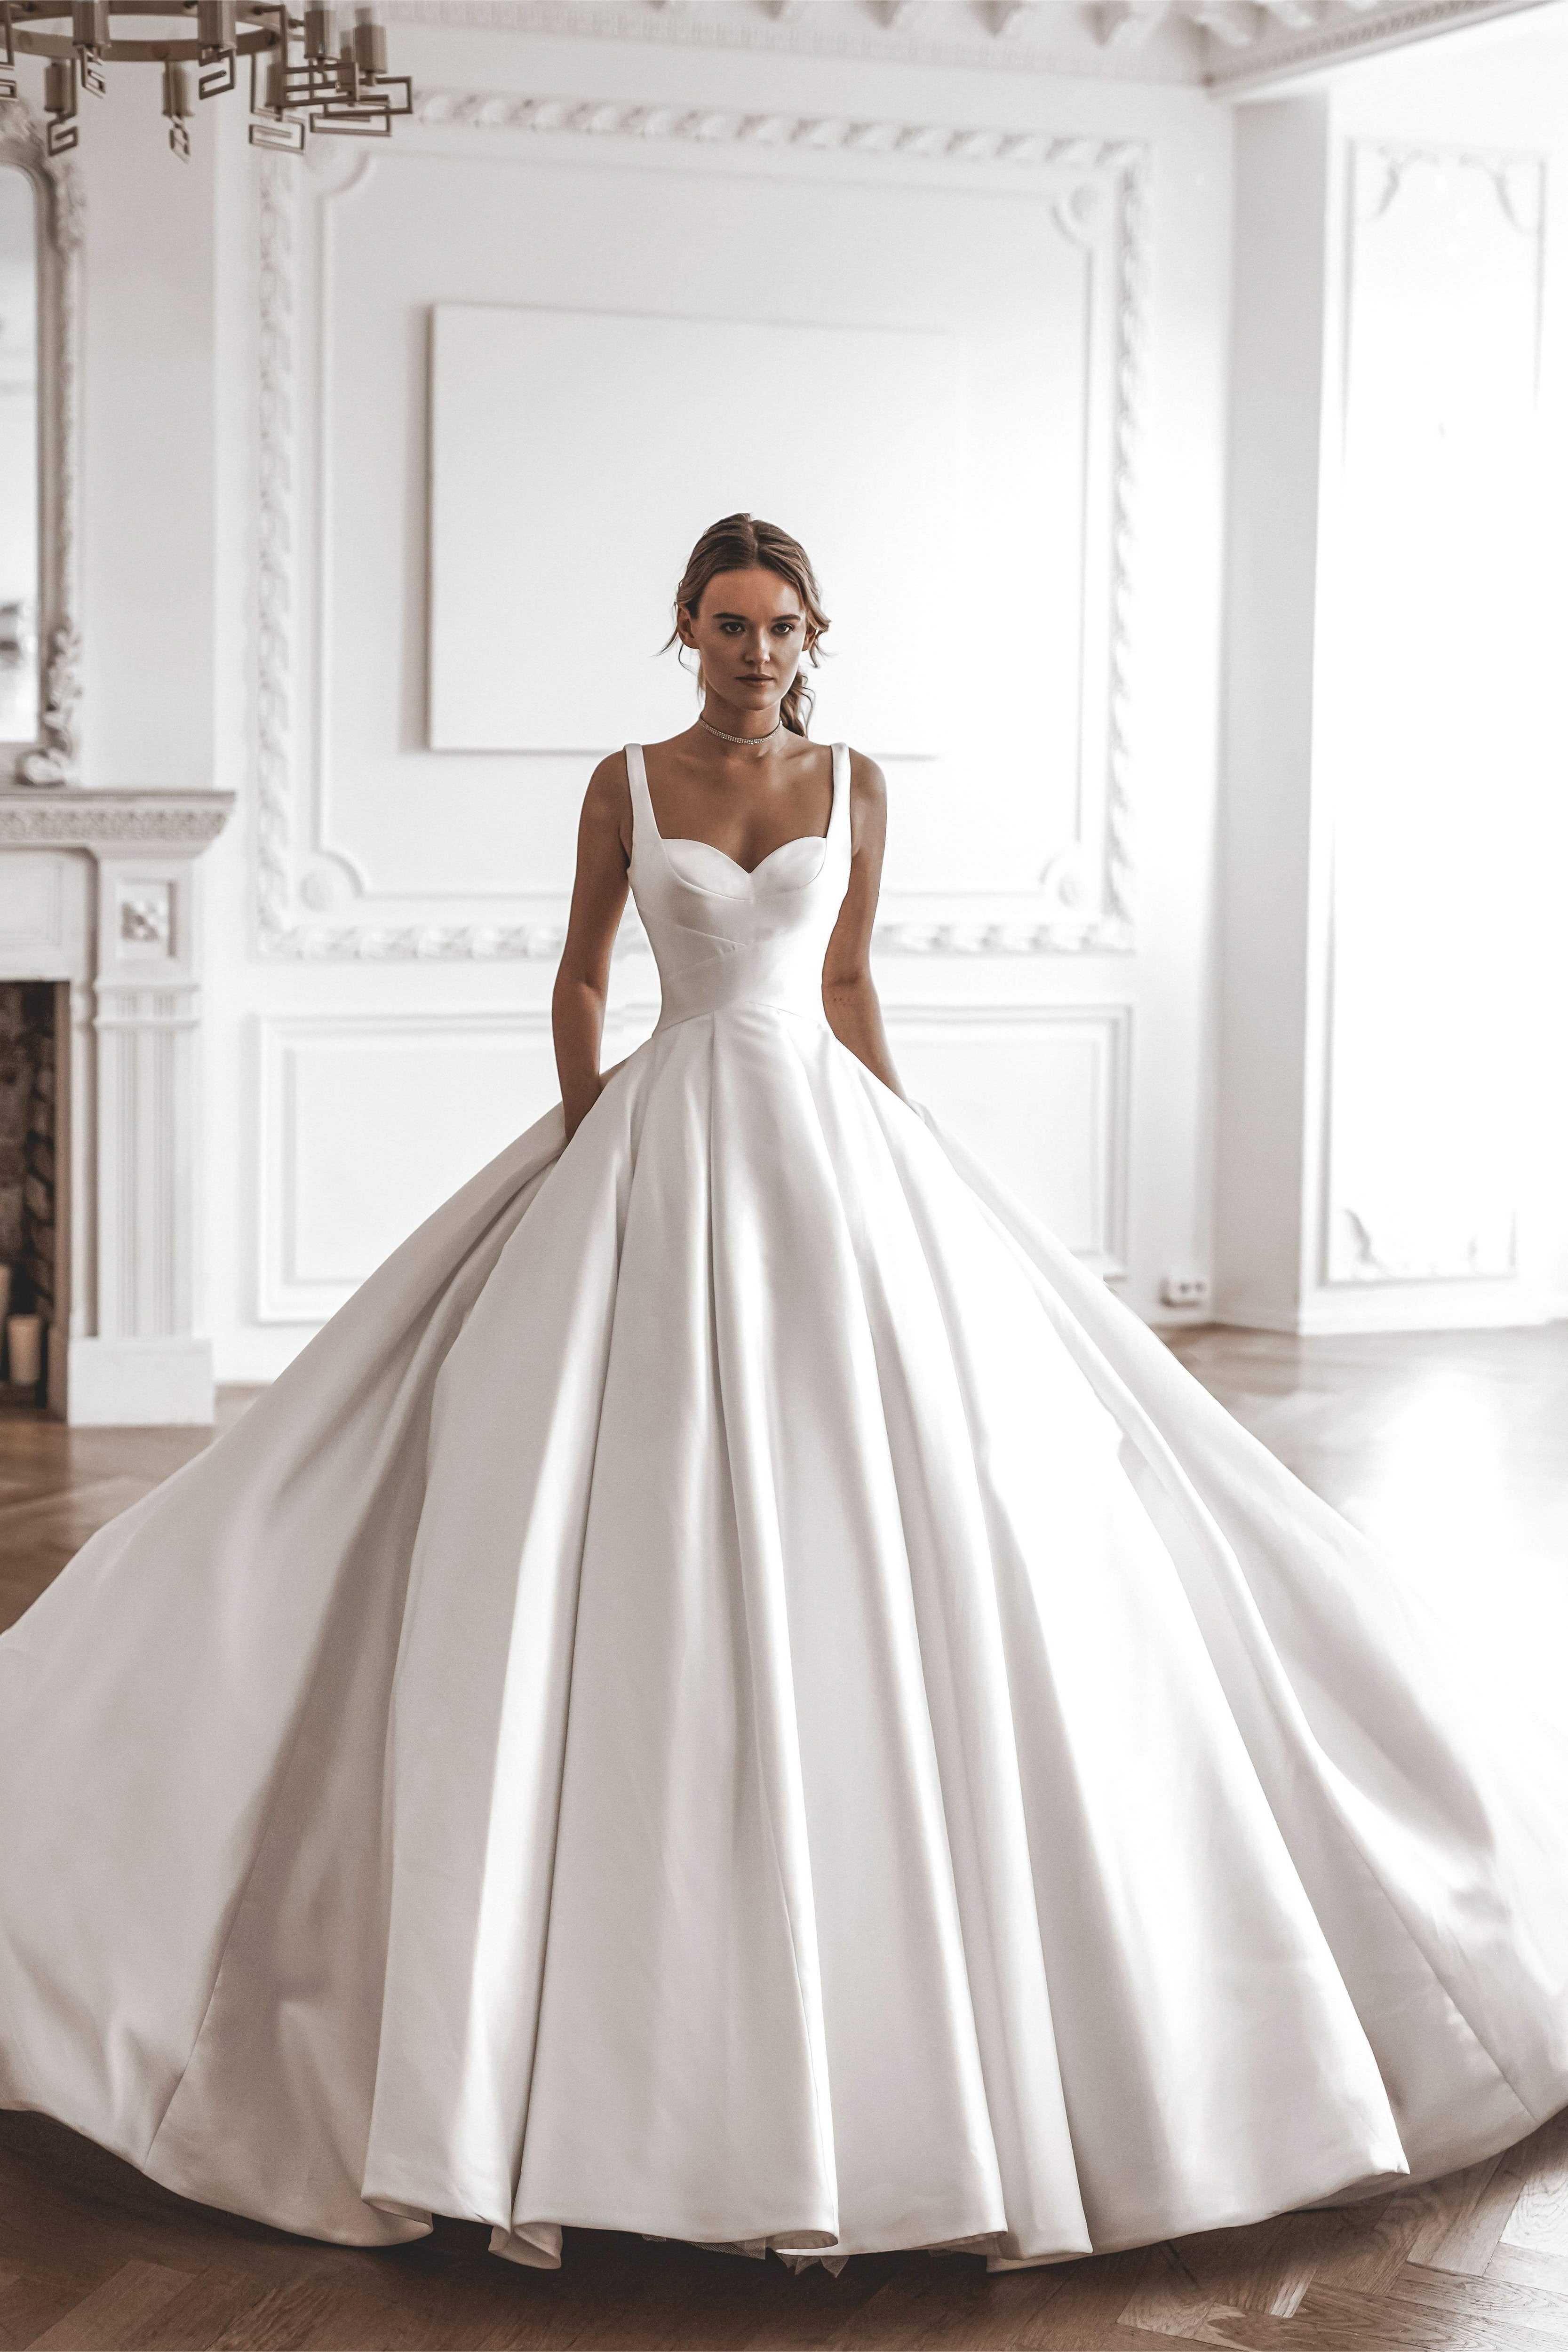 Embroidered Lace Applique Ball Gown Wedding Dress | David's Bridal